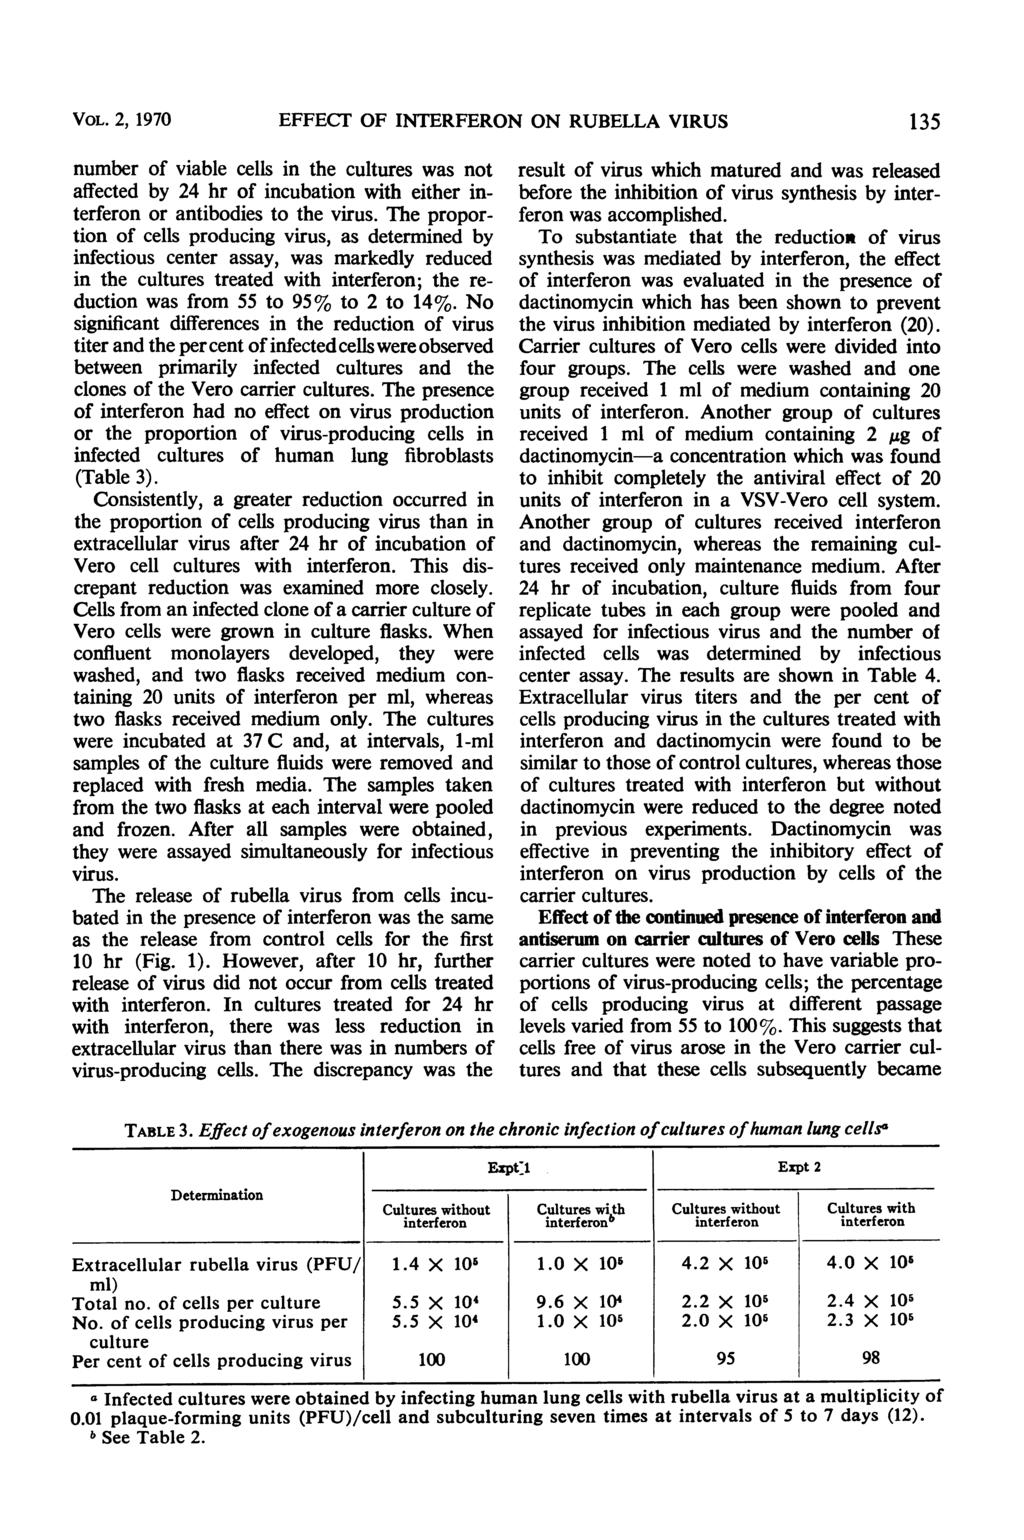 VOL. 2, 1970 EFFECT OF IERFERON ON RUBELLA VIRUS 135 number of viable cells in the cultures was not affected by 24 hr of incubation with either interferon or antibodies to the virus.